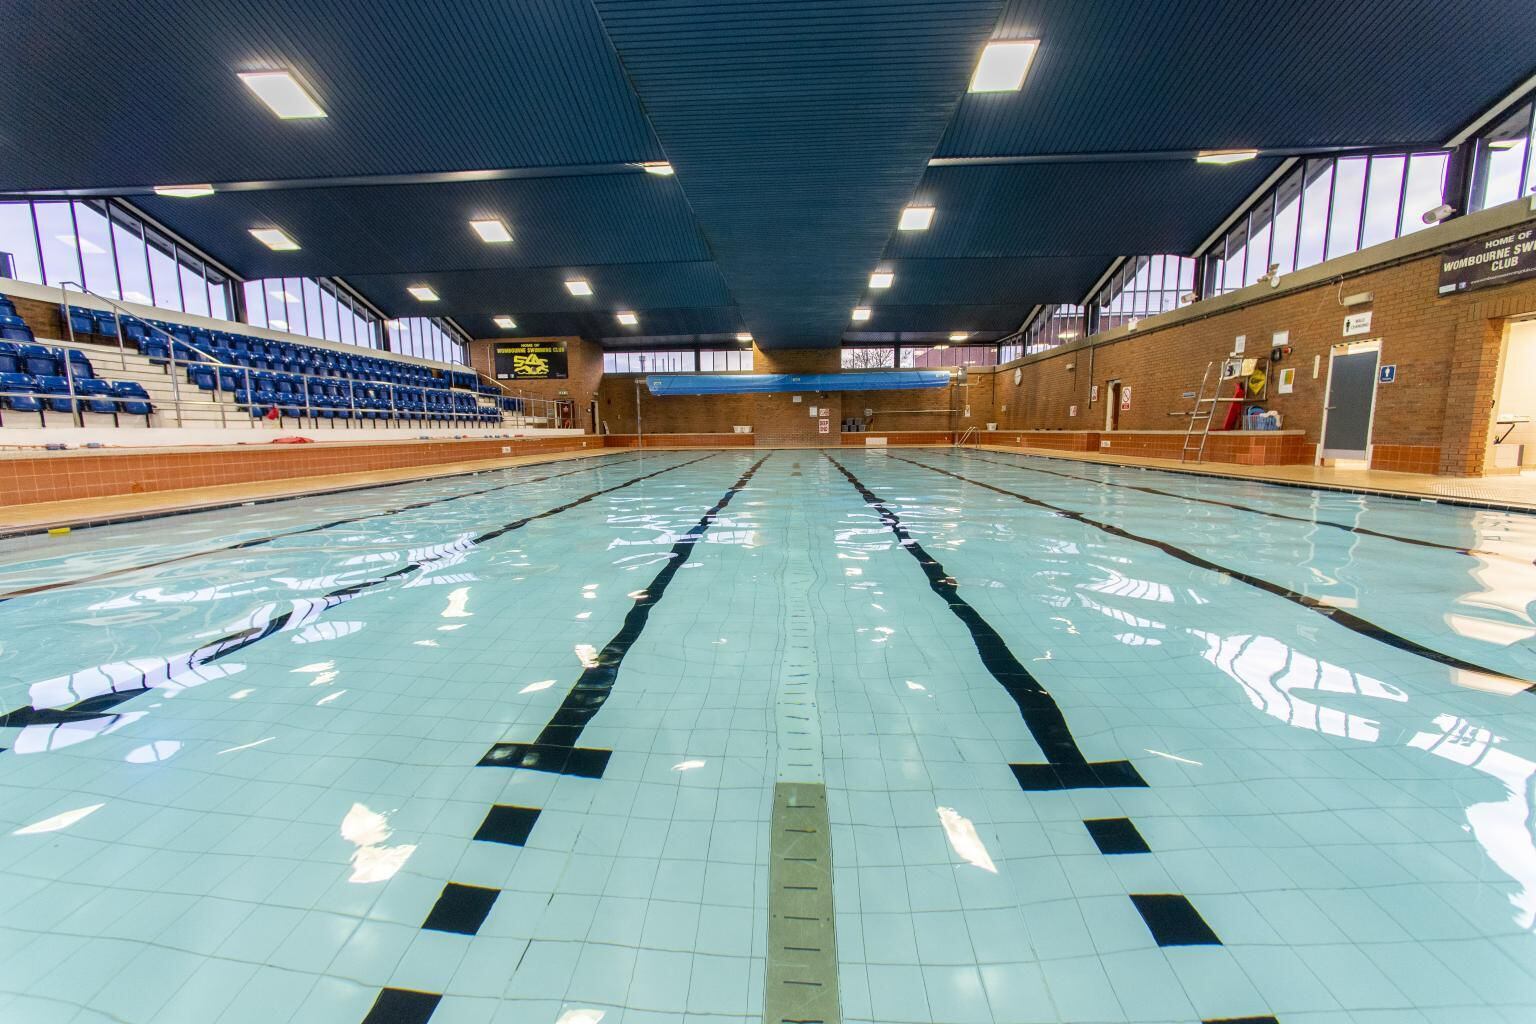 Wombourne Leisure Centre swimming pool set to reopen after major revamp